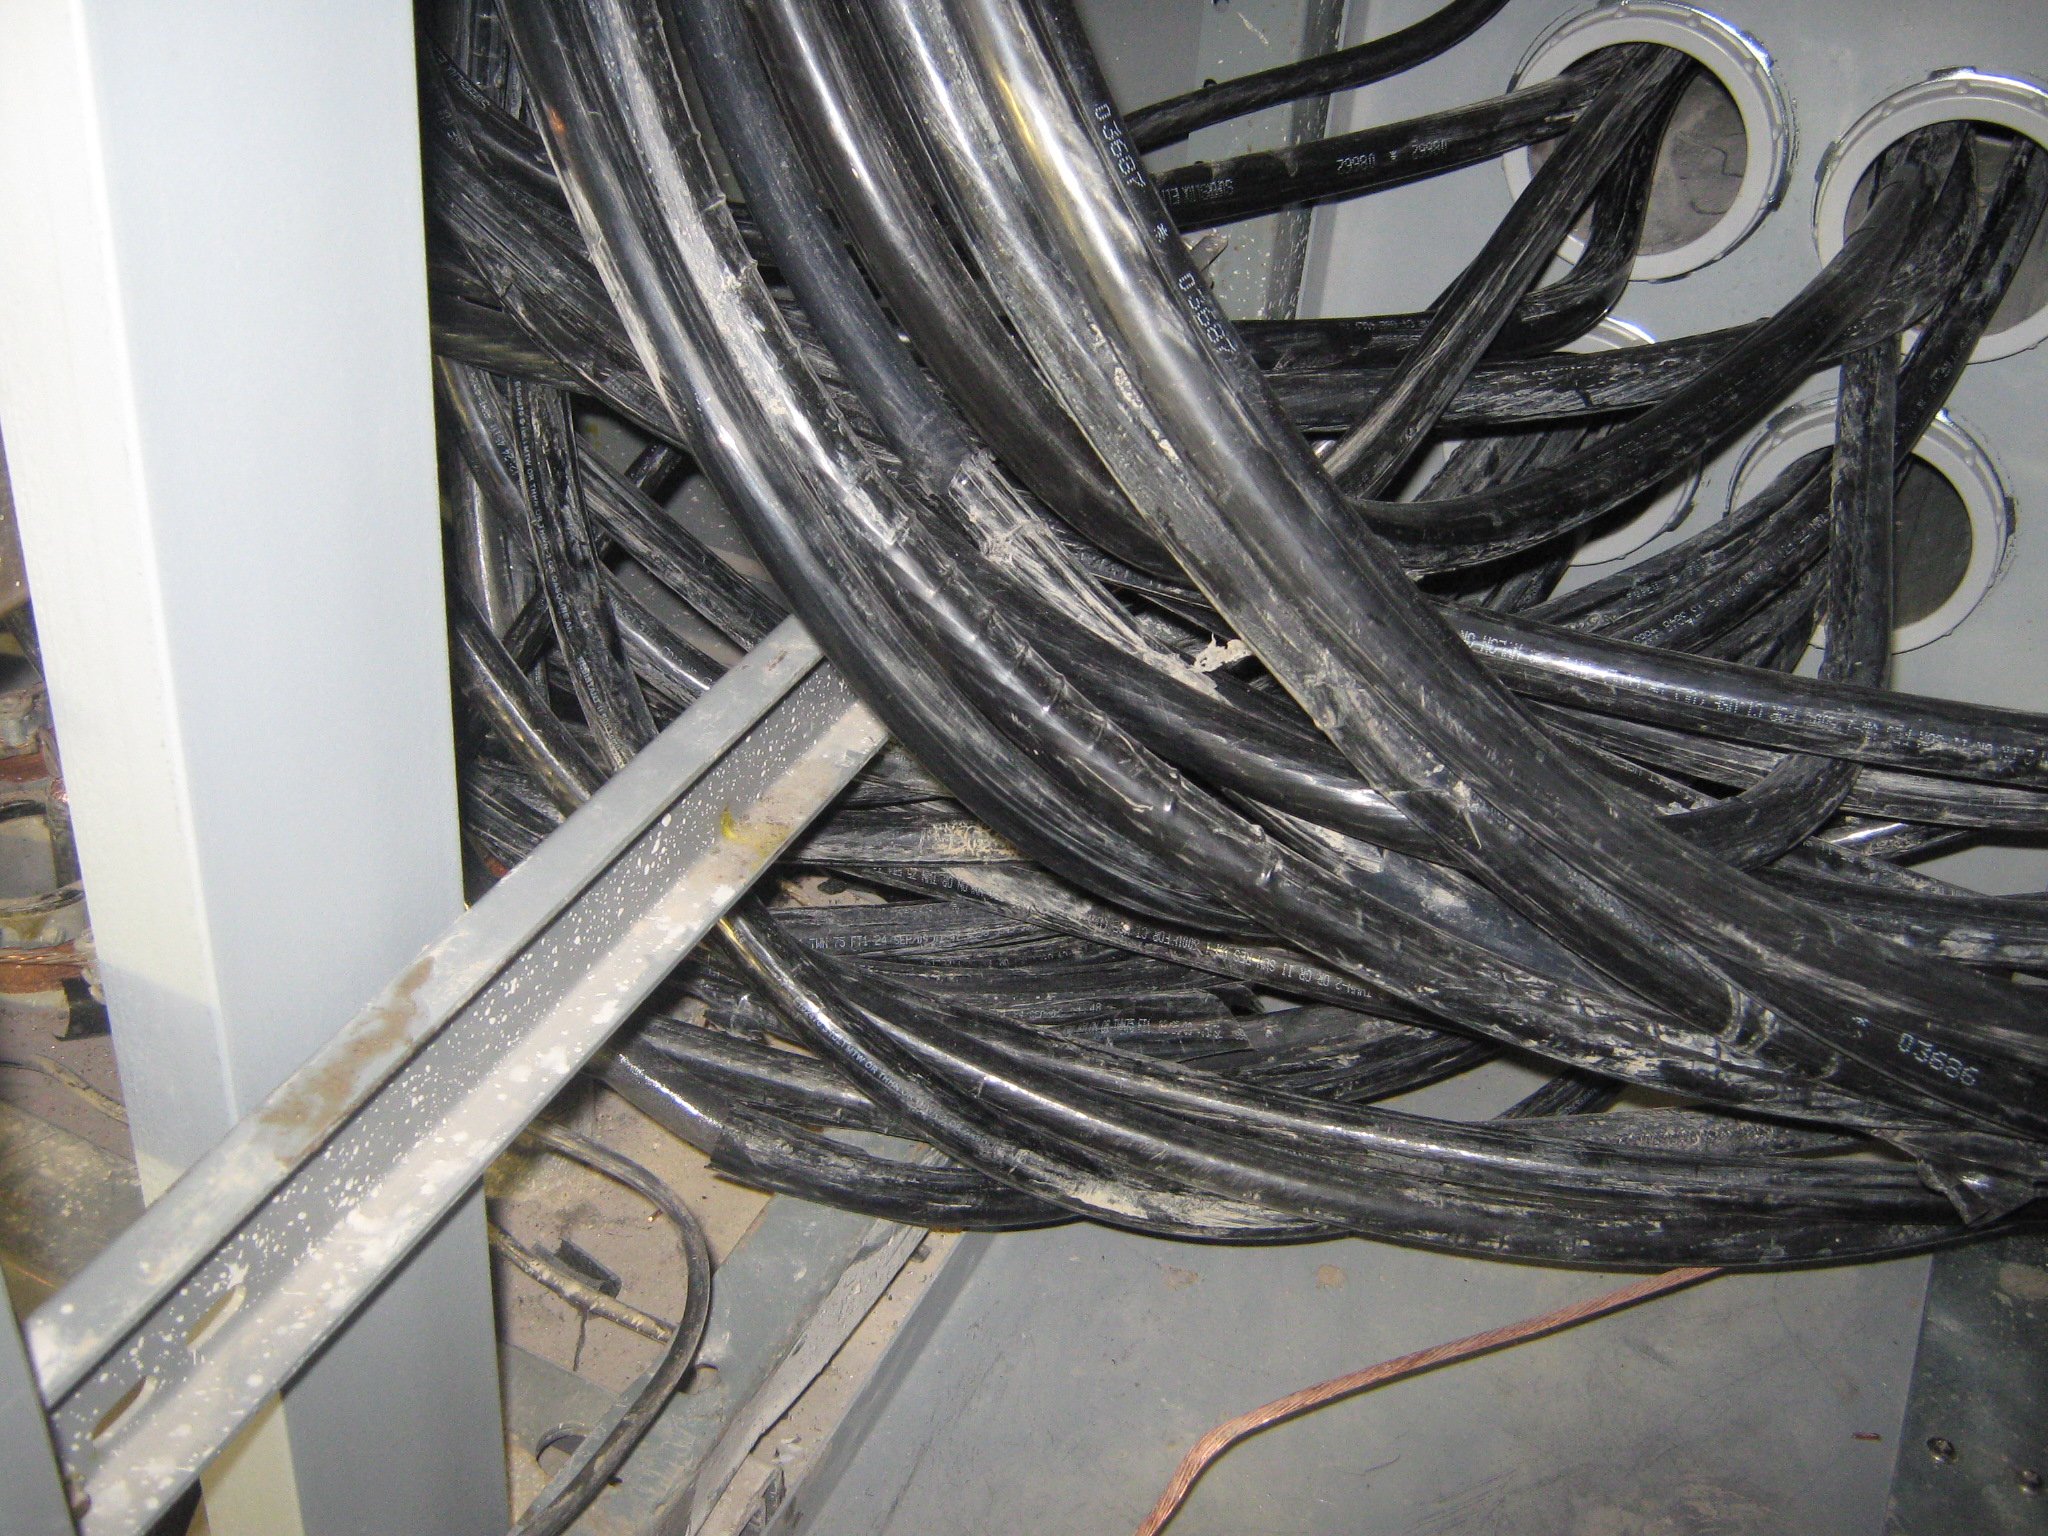 Cables lying on a metal support channel, creating a risk for inductive heating